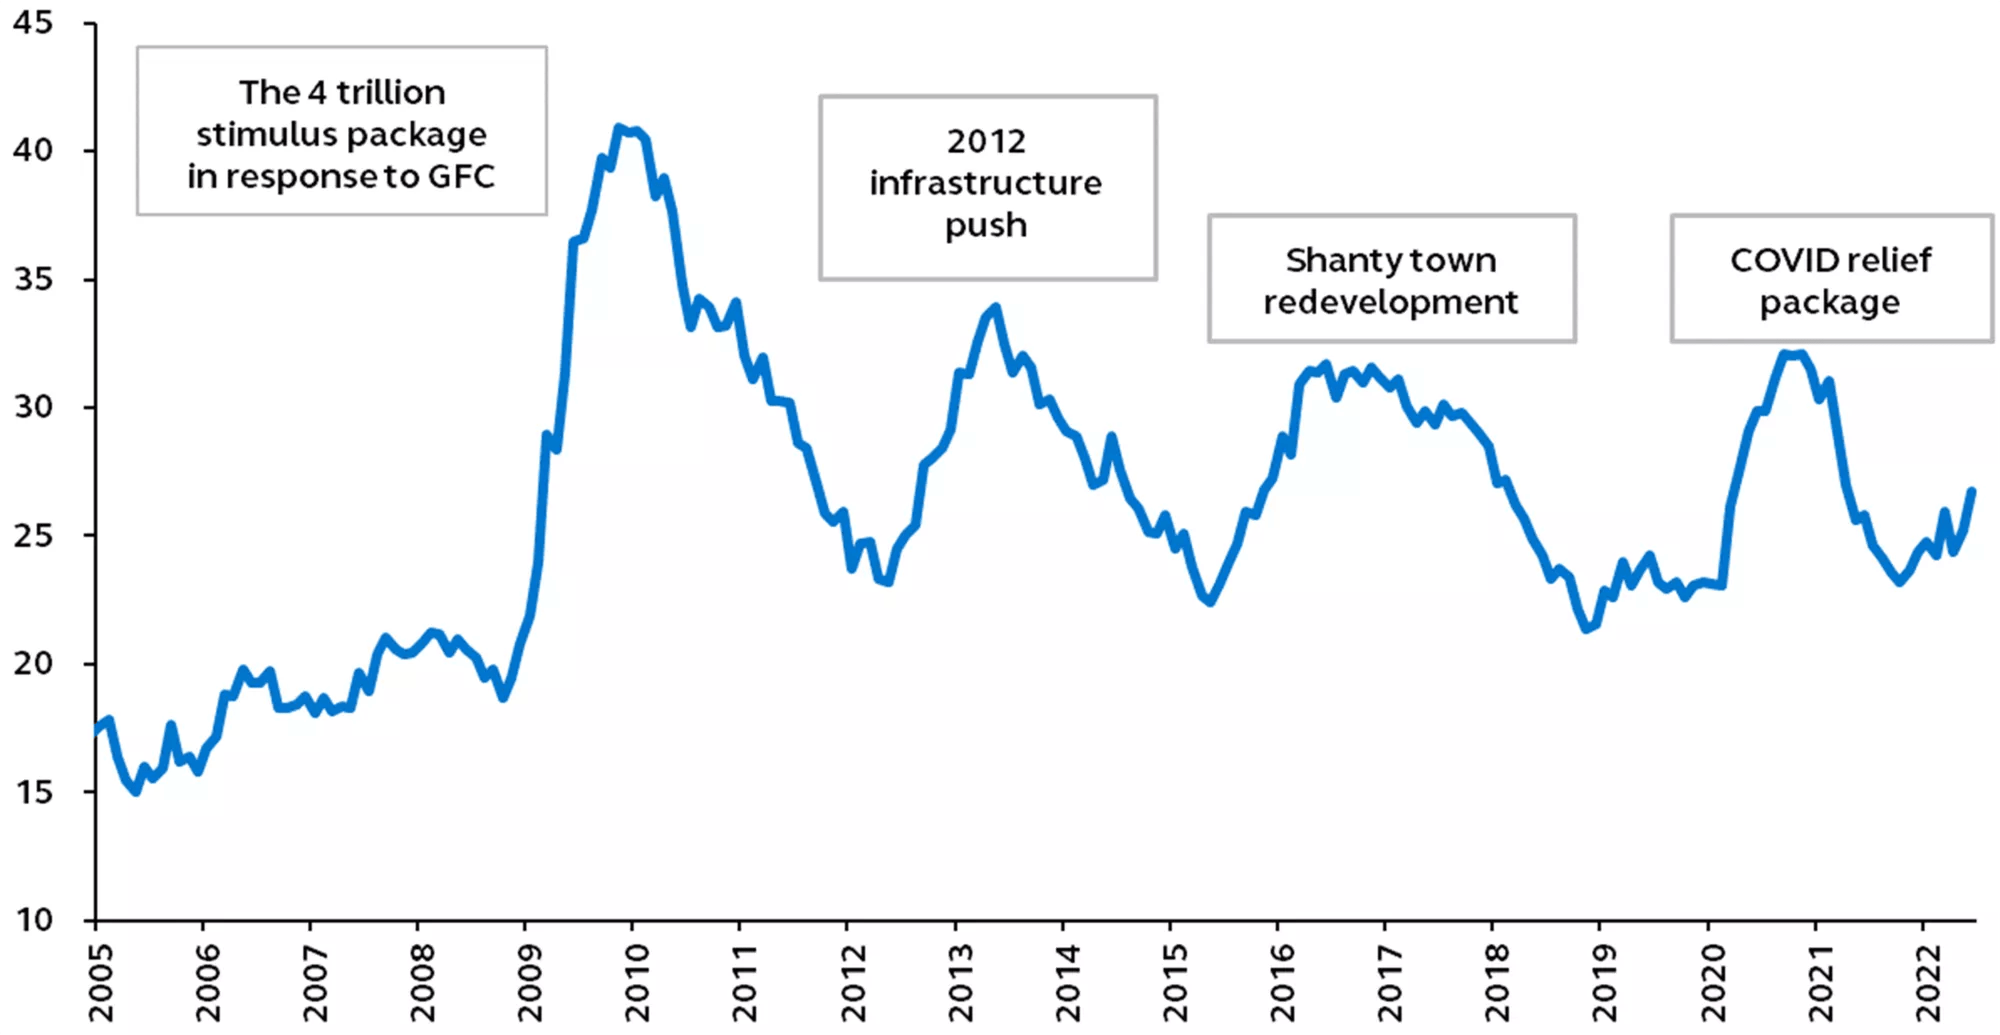 China credit impulse index from 2005 to present